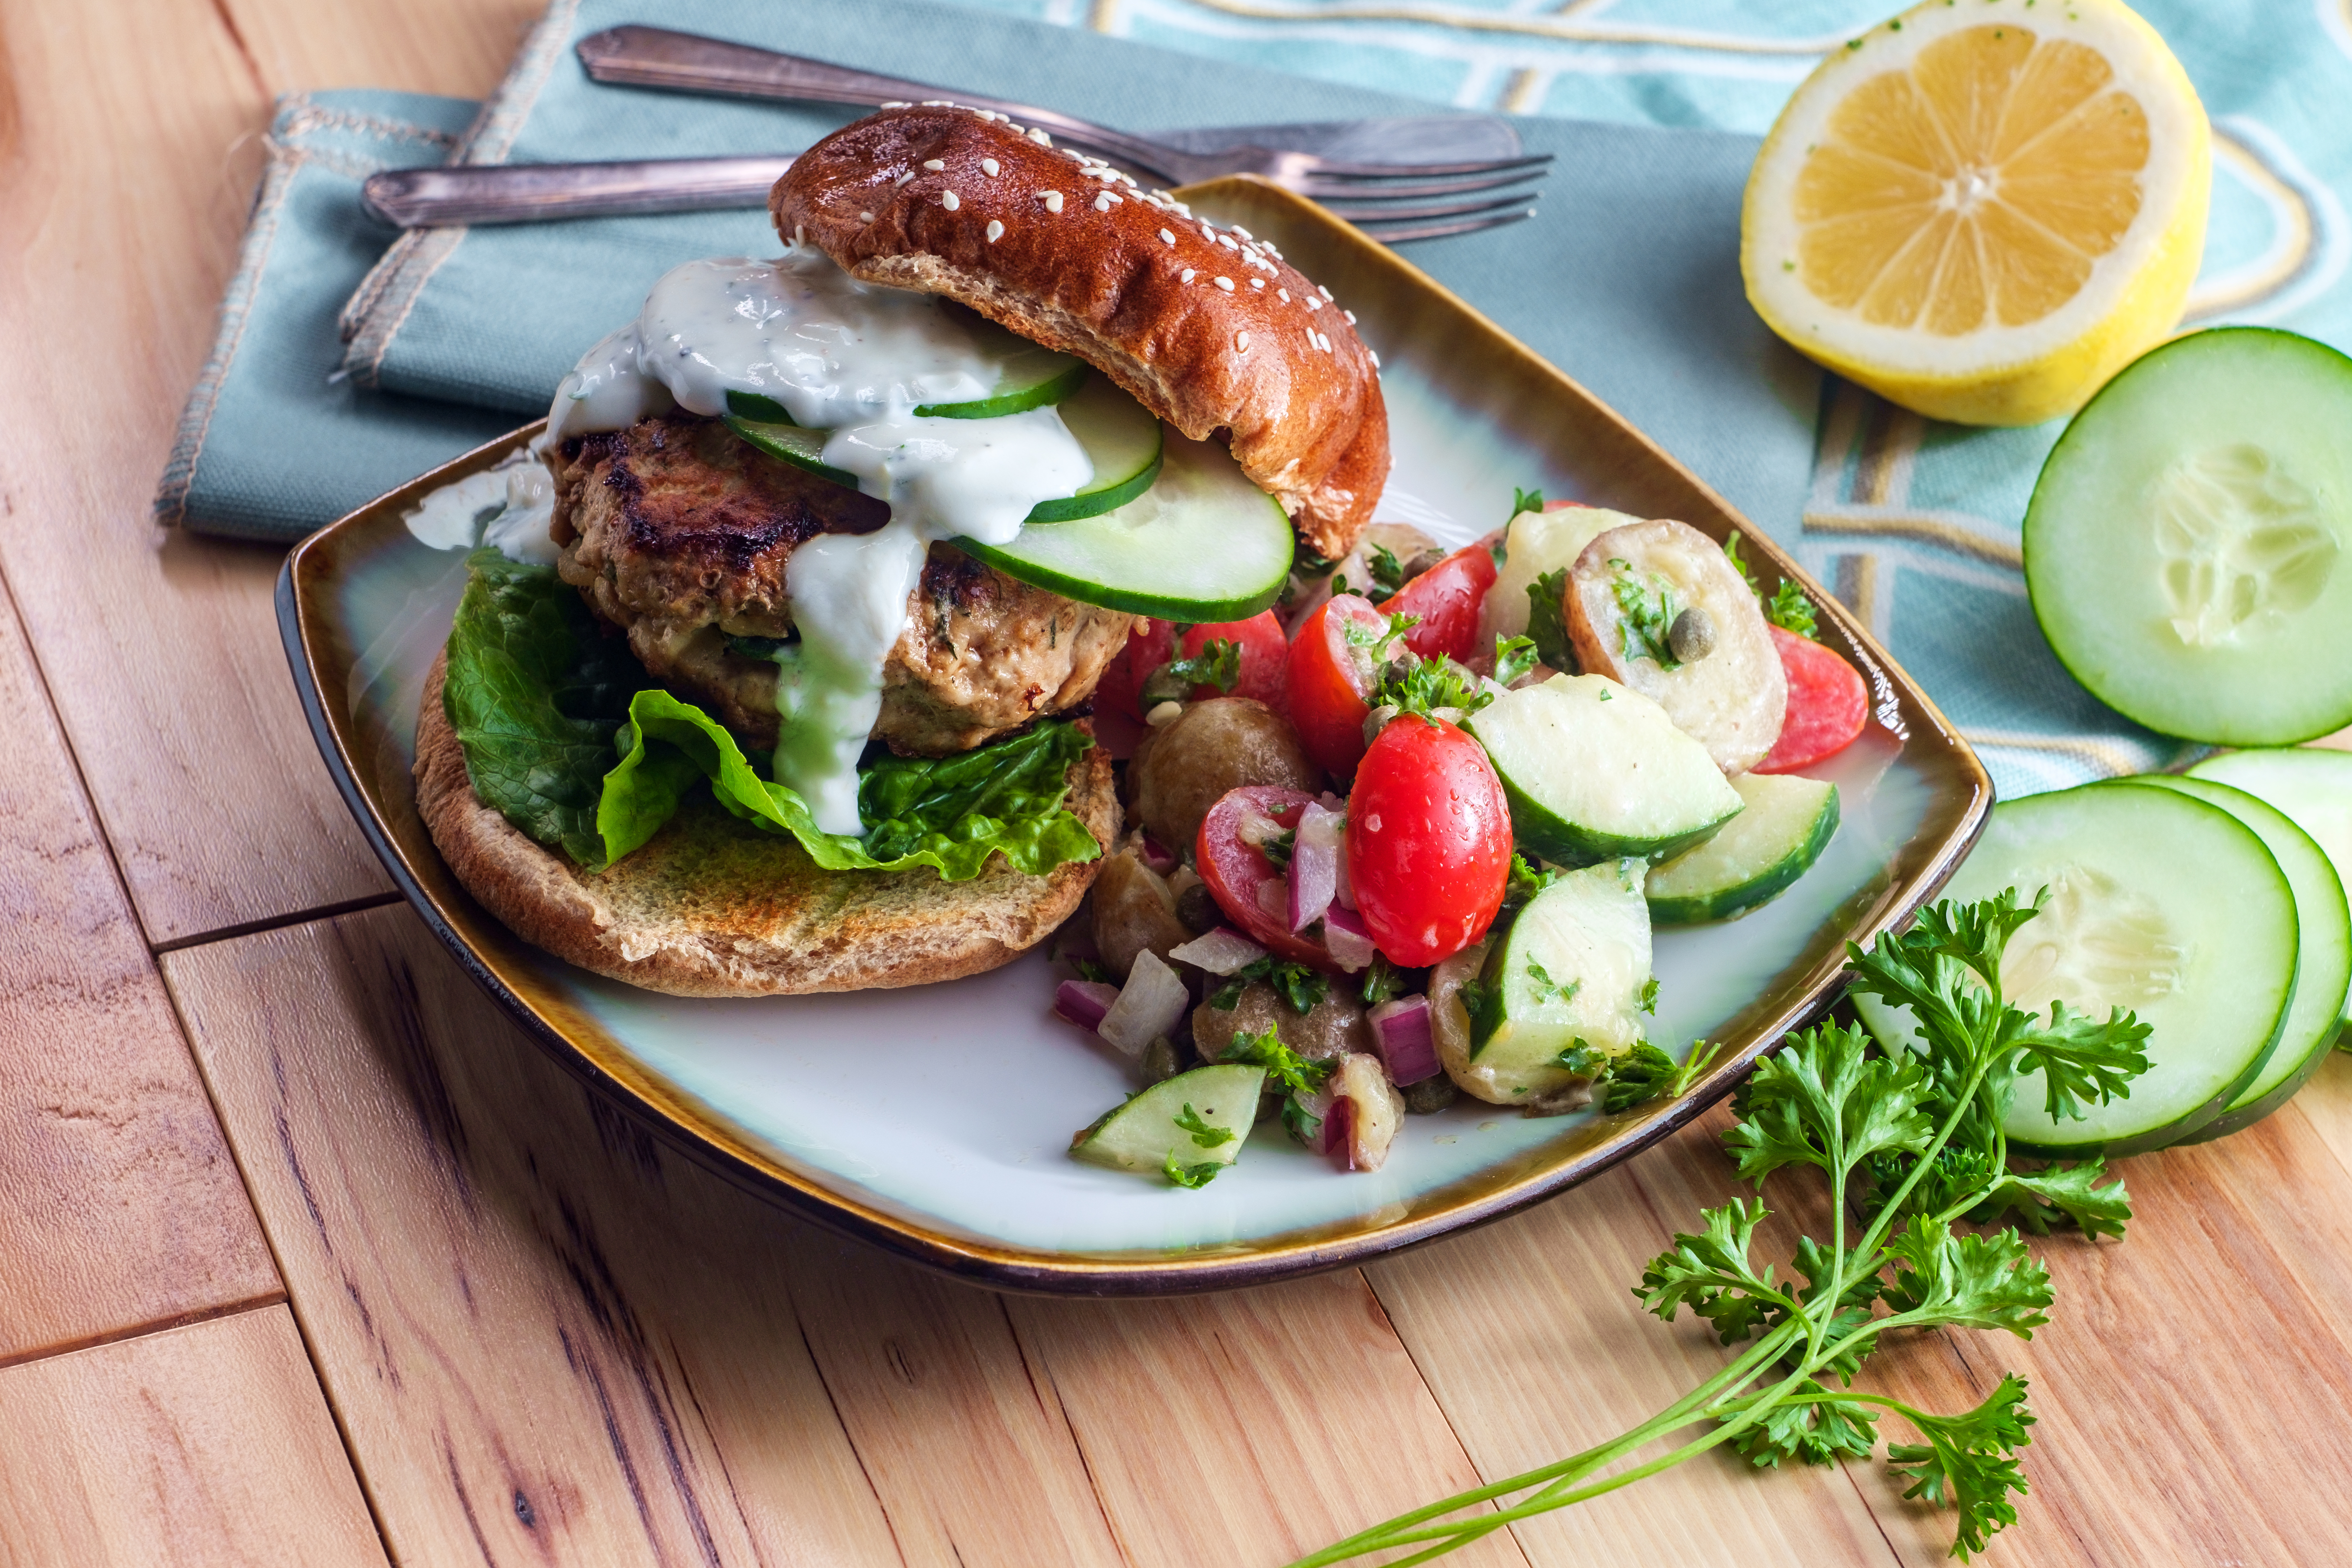 A turkey burger served with salad | Source: Shutterstock